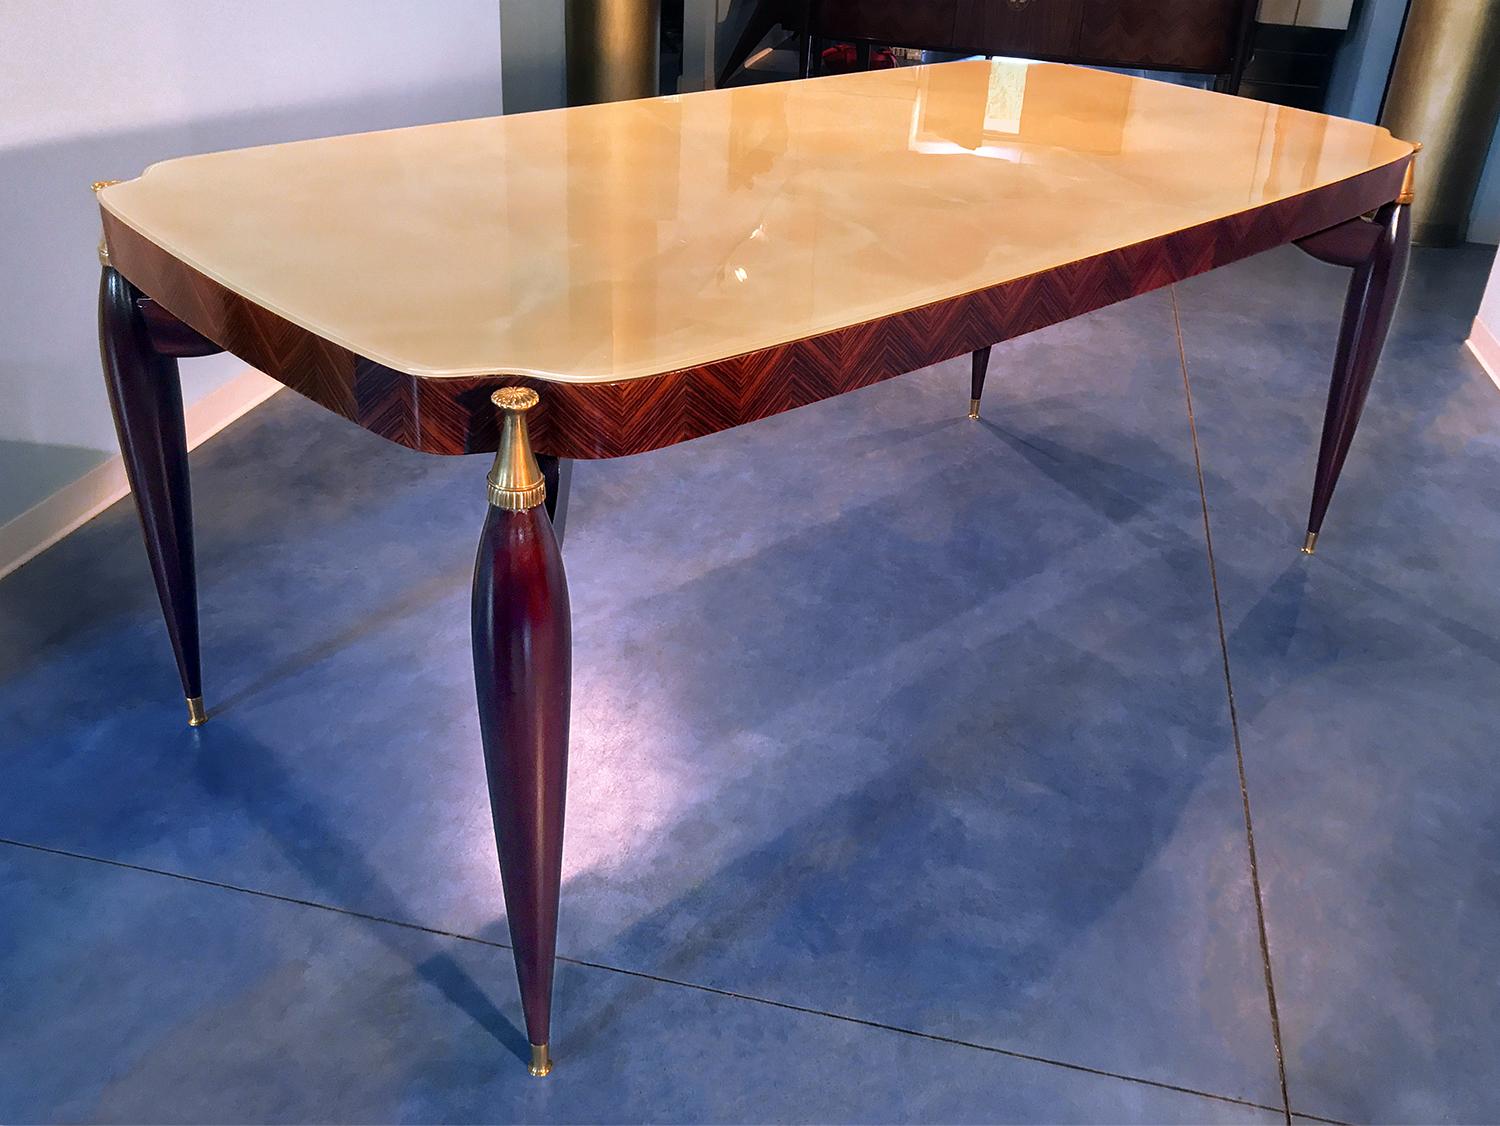 This marvellous Table is very rare and its design is attributable to Paolo Buffa in the 1950s.
The table has a sculptured design, unique, very stylish and charming, characterized by structure with curved shapes made in rosewood and finished with